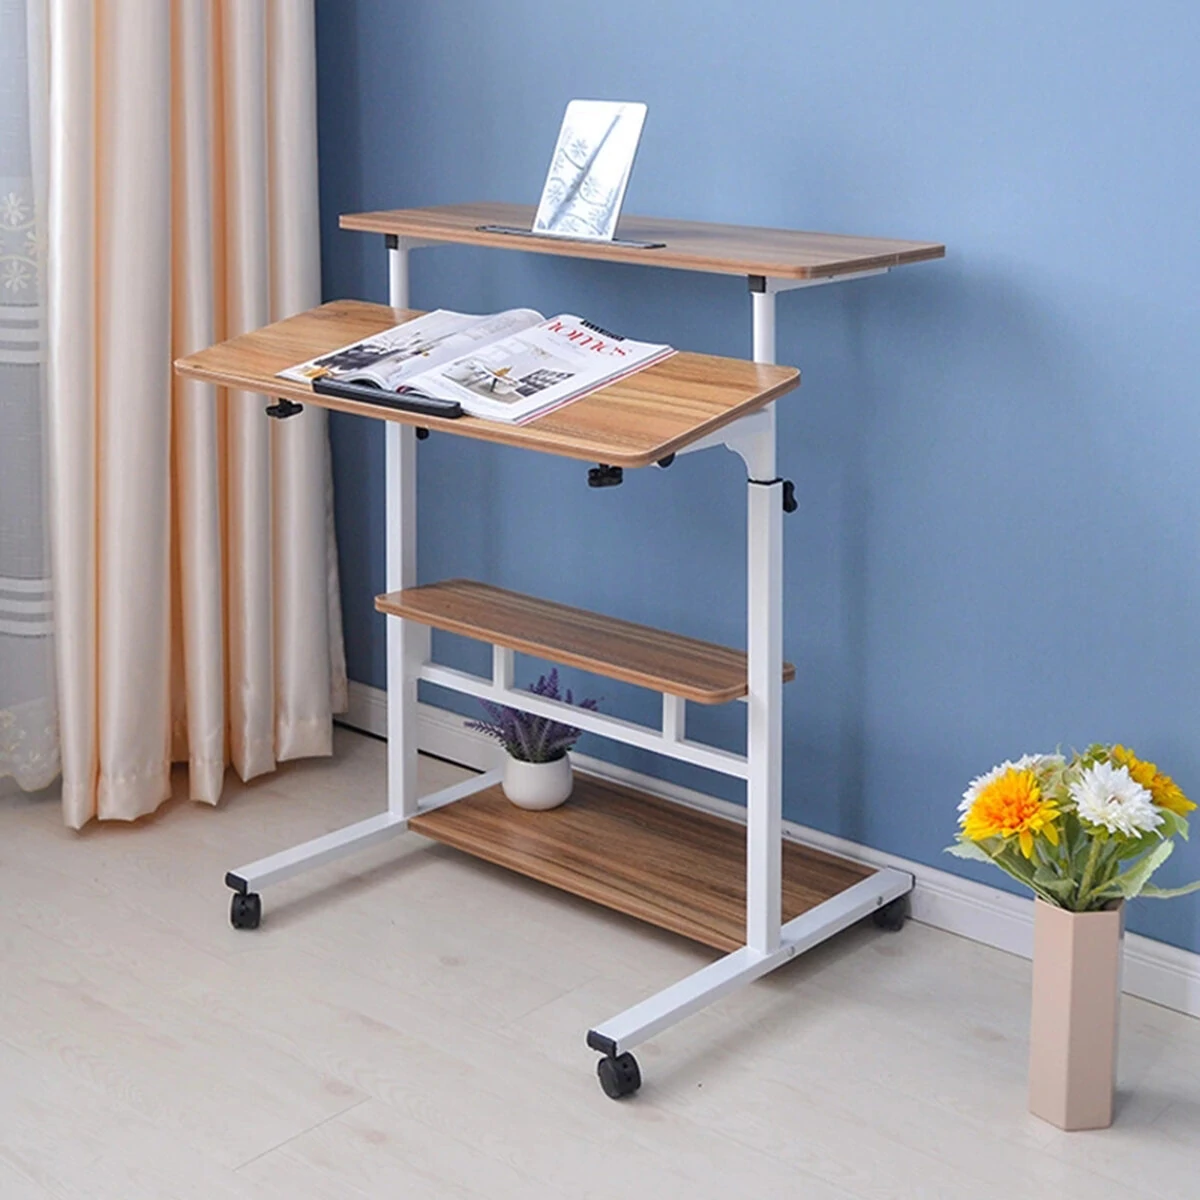 Computer Laptop desk Height Adjustable Table Movable Rolling Stand-Up Table Workstation Home Office Furniture - Wood